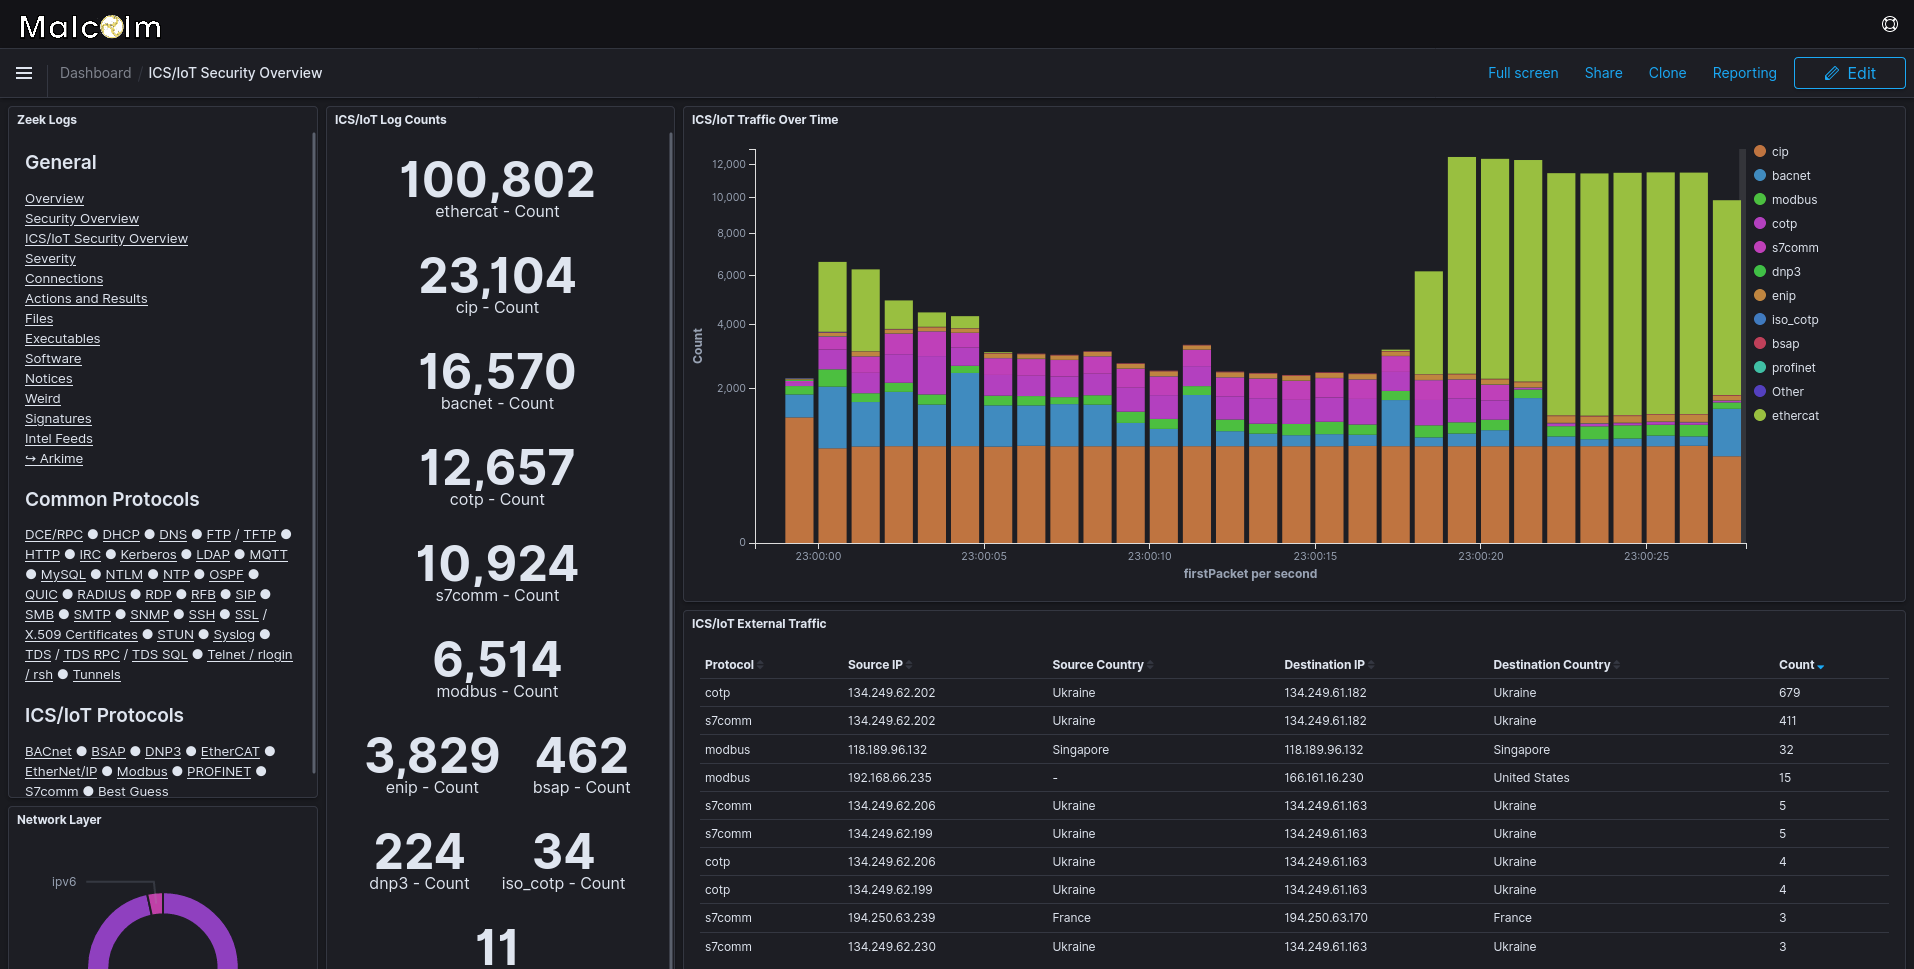 The ICS/IoT Security Overview dashboard displays information about ICS and IoT network traffic